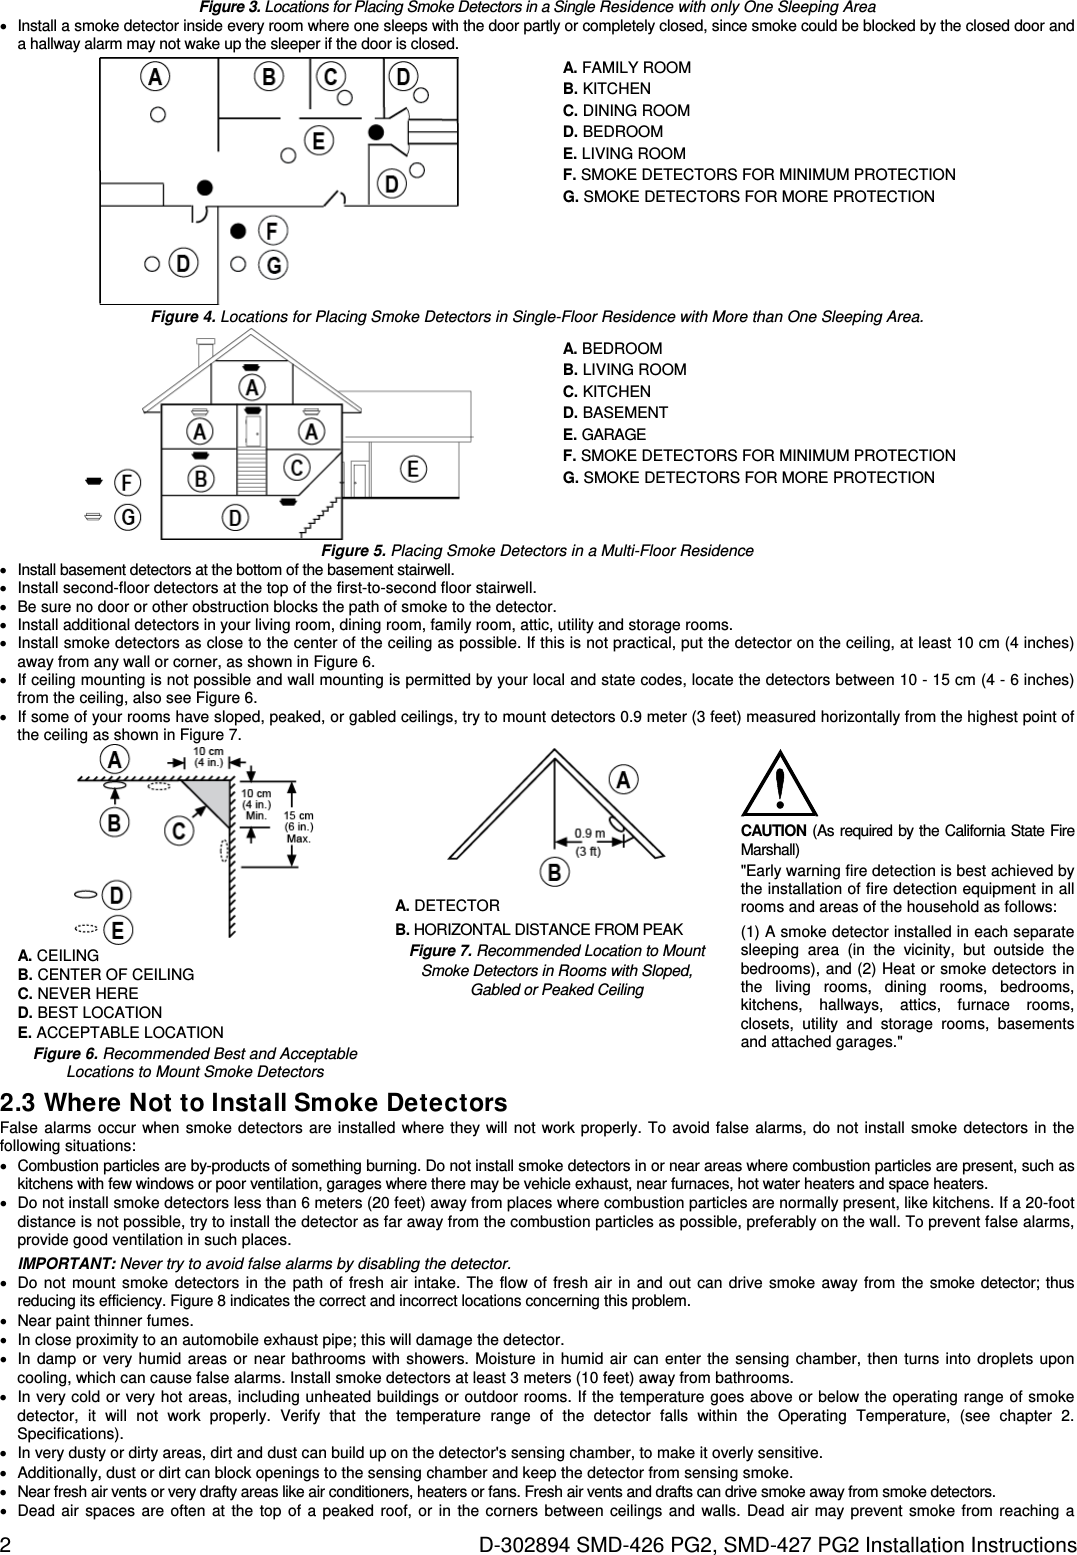 2  D-302894 SMD-426 PG2, SMD-427 PG2 Installation Instructions Figure 3. Locations for Placing Smoke Detectors in a Single Residence with only One Sleeping Area   Install a smoke detector inside every room where one sleeps with the door partly or completely closed, since smoke could be blocked by the closed door and a hallway alarm may not wake up the sleeper if the door is closed. A. FAMILY ROOM B. KITCHEN C. DINING ROOM D. BEDROOM E. LIVING ROOM F. SMOKE DETECTORS FOR MINIMUM PROTECTION G. SMOKE DETECTORS FOR MORE PROTECTION Figure 4. Locations for Placing Smoke Detectors in Single-Floor Residence with More than One Sleeping Area. A. BEDROOM B. LIVING ROOM C. KITCHEN D. BASEMENT E. GARAGE F. SMOKE DETECTORS FOR MINIMUM PROTECTION G. SMOKE DETECTORS FOR MORE PROTECTION Figure 5. Placing Smoke Detectors in a Multi-Floor Residence   Install basement detectors at the bottom of the basement stairwell.   Install second-floor detectors at the top of the first-to-second floor stairwell.   Be sure no door or other obstruction blocks the path of smoke to the detector.   Install additional detectors in your living room, dining room, family room, attic, utility and storage rooms.   Install smoke detectors as close to the center of the ceiling as possible. If this is not practical, put the detector on the ceiling, at least 10 cm (4 inches) away from any wall or corner, as shown in Figure 6.   If ceiling mounting is not possible and wall mounting is permitted by your local and state codes, locate the detectors between 10 - 15 cm (4 - 6 inches) from the ceiling, also see Figure 6.   If some of your rooms have sloped, peaked, or gabled ceilings, try to mount detectors 0.9 meter (3 feet) measured horizontally from the highest point of the ceiling as shown in Figure 7.  A. CEILING B. CENTER OF CEILING C. NEVER HERE D. BEST LOCATION E. ACCEPTABLE LOCATION Figure 6. Recommended Best and Acceptable Locations to Mount Smoke Detectors  A. DETECTOR B. HORIZONTAL DISTANCE FROM PEAK Figure 7. Recommended Location to Mount Smoke Detectors in Rooms with Sloped, Gabled or Peaked Ceiling   CAUTION (As required by the California State Fire Marshall) &quot;Early warning fire detection is best achieved by the installation of fire detection equipment in all rooms and areas of the household as follows: (1) A smoke detector installed in each separate sleeping area (in the vicinity, but outside the bedrooms), and (2) Heat or smoke detectors in the living rooms, dining rooms, bedrooms, kitchens, hallways, attics, furnace rooms, closets, utility and storage rooms, basements and attached garages.&quot; 2.3 Where N ot to I nst all Smok e Dete c tors False alarms occur when smoke detectors are installed where they will not work properly. To avoid false alarms, do not install smoke detectors in the following situations:   Combustion particles are by-products of something burning. Do not install smoke detectors in or near areas where combustion particles are present, such as kitchens with few windows or poor ventilation, garages where there may be vehicle exhaust, near furnaces, hot water heaters and space heaters.   Do not install smoke detectors less than 6 meters (20 feet) away from places where combustion particles are normally present, like kitchens. If a 20-foot distance is not possible, try to install the detector as far away from the combustion particles as possible, preferably on the wall. To prevent false alarms, provide good ventilation in such places. IMPORTANT: Never try to avoid false alarms by disabling the detector.   Do not mount smoke detectors in the path of fresh air intake. The flow of fresh air in and out can drive smoke away from the smoke detector; thus reducing its efficiency. Figure 8 indicates the correct and incorrect locations concerning this problem.   Near paint thinner fumes.   In close proximity to an automobile exhaust pipe; this will damage the detector.   In damp or very humid areas or near bathrooms with showers. Moisture in humid air can enter the sensing chamber, then turns into droplets upon cooling, which can cause false alarms. Install smoke detectors at least 3 meters (10 feet) away from bathrooms.   In very cold or very hot areas, including unheated buildings or outdoor rooms. If the temperature goes above or below the operating range of smoke detector, it will not work properly. Verify that the temperature range of the detector falls within the Operating Temperature, (see chapter 2. Specifications).   In very dusty or dirty areas, dirt and dust can build up on the detector&apos;s sensing chamber, to make it overly sensitive.    Additionally, dust or dirt can block openings to the sensing chamber and keep the detector from sensing smoke.   Near fresh air vents or very drafty areas like air conditioners, heaters or fans. Fresh air vents and drafts can drive smoke away from smoke detectors.   Dead air spaces are often at the top of a peaked roof, or in the corners between ceilings and walls. Dead air may prevent smoke from reaching a 